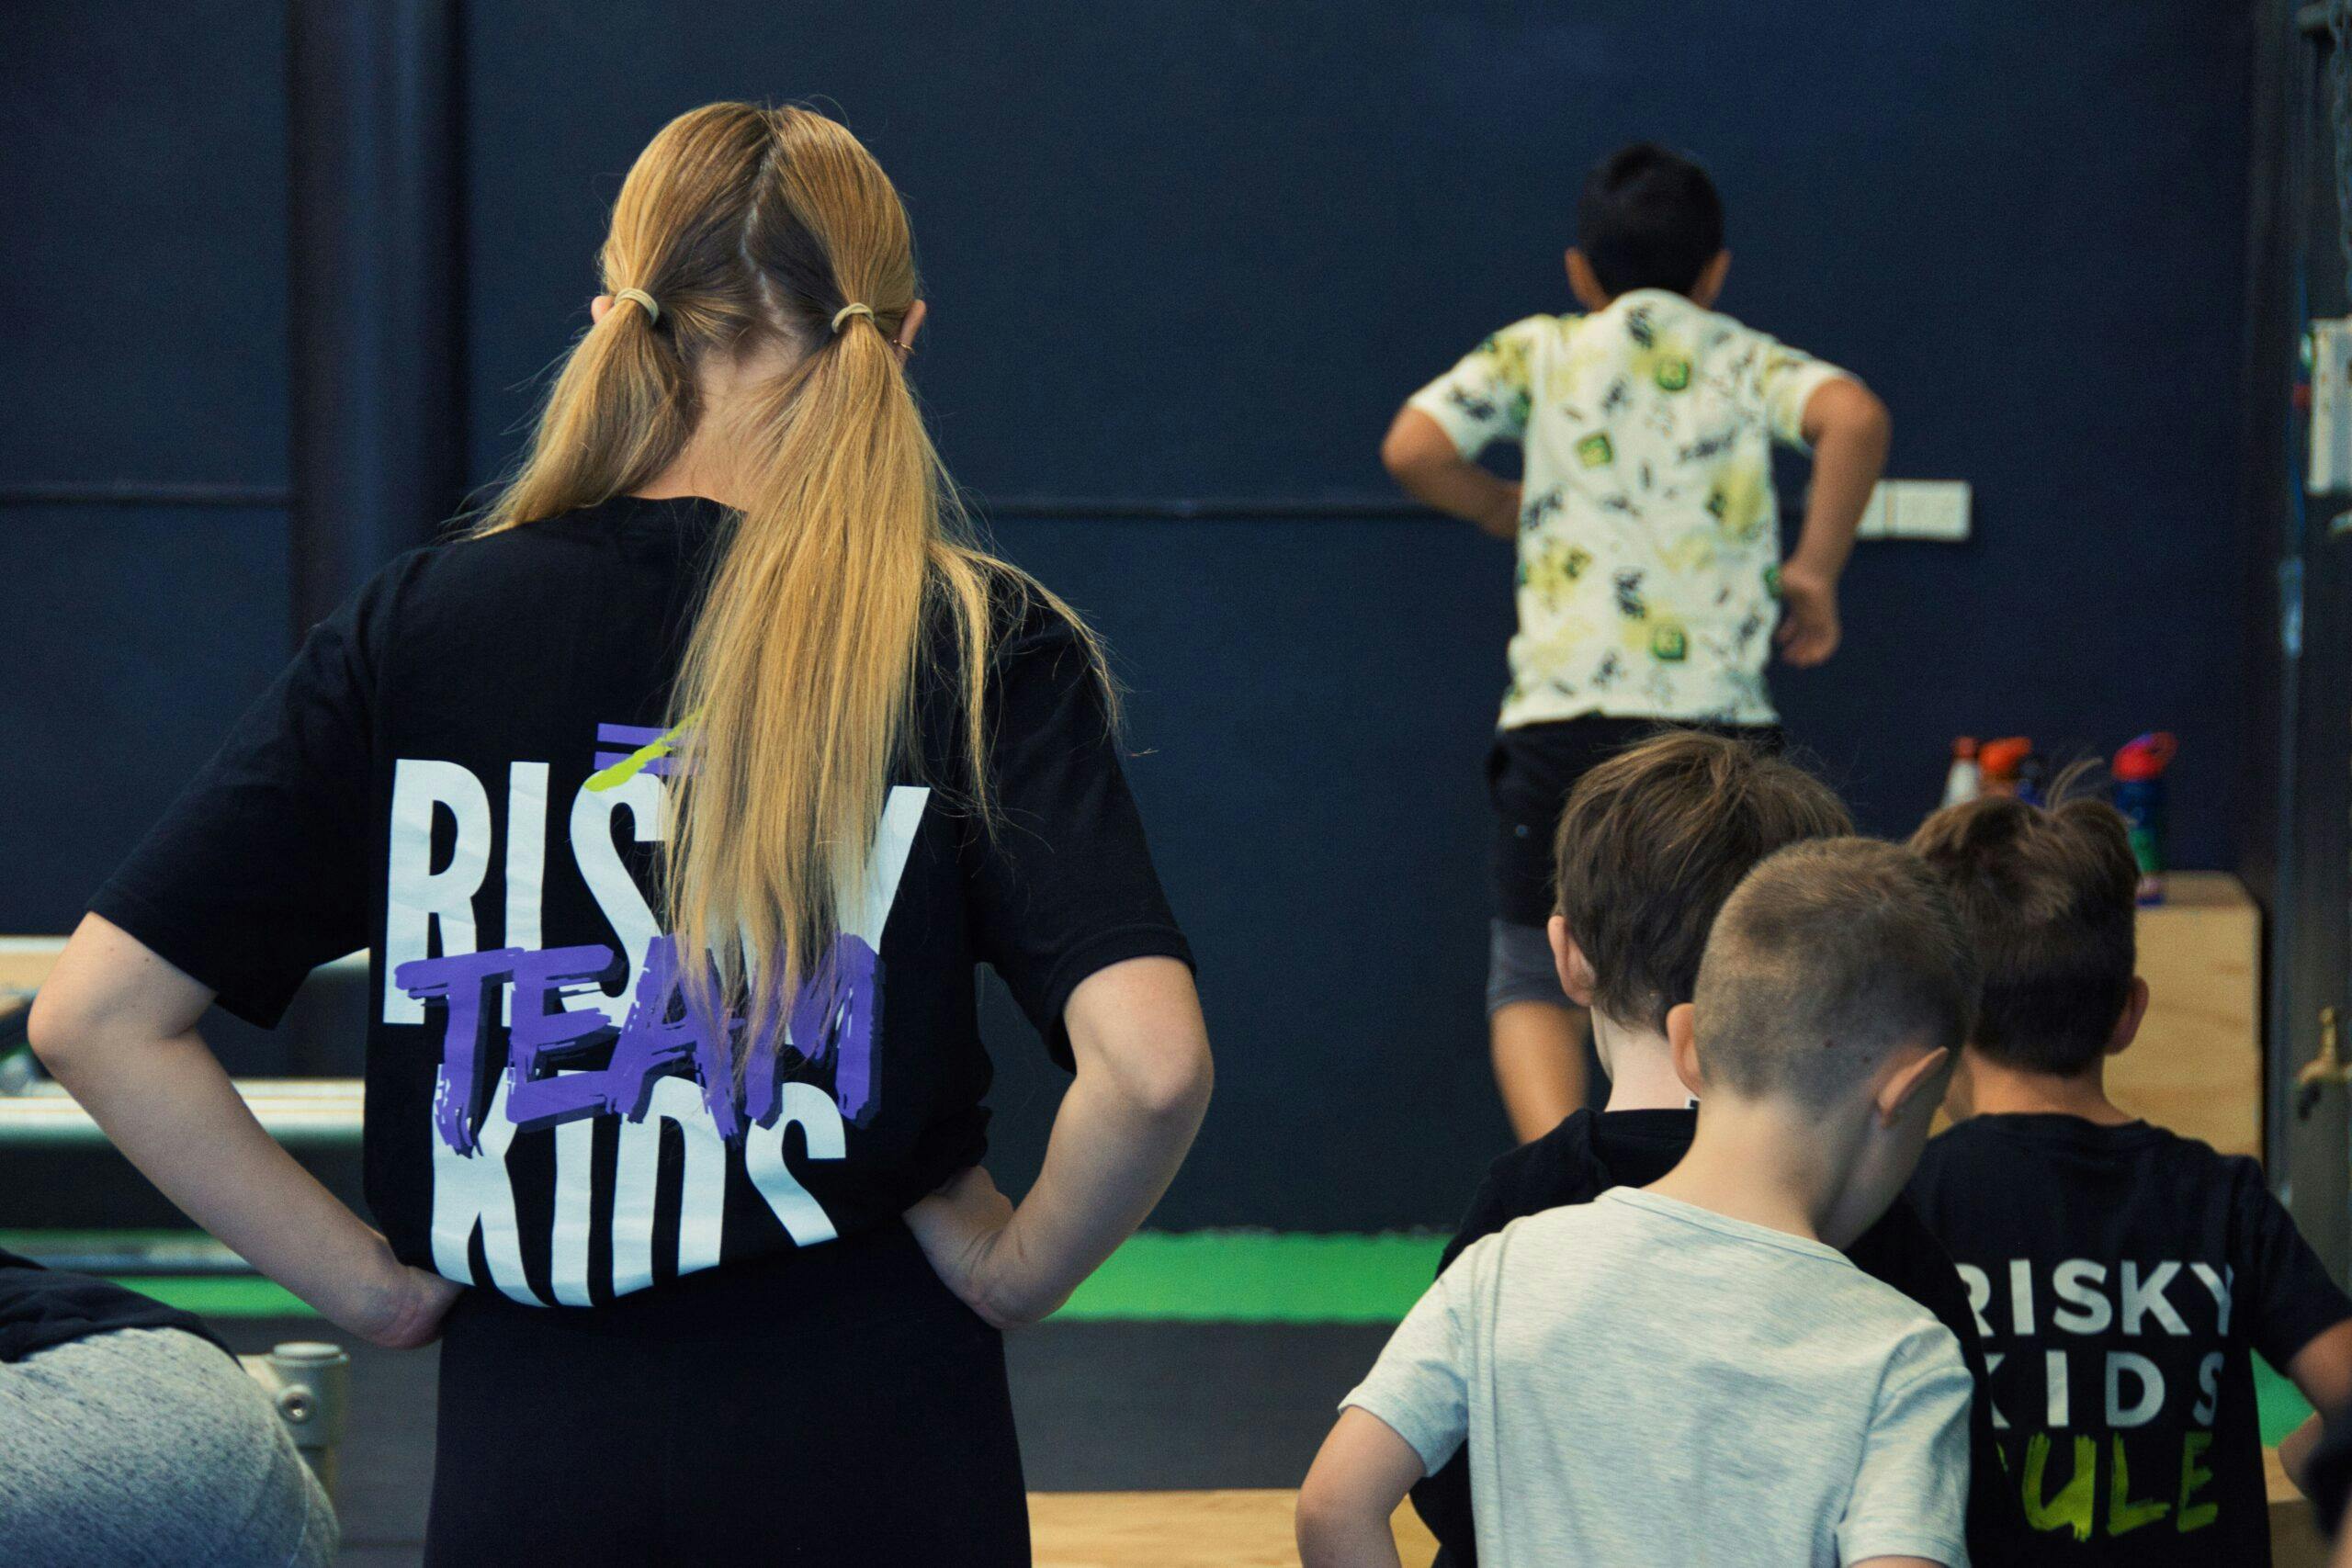 Risky Kids Careers. Learn behavioural science and management skills, along with parkor, freerun and ninja training.